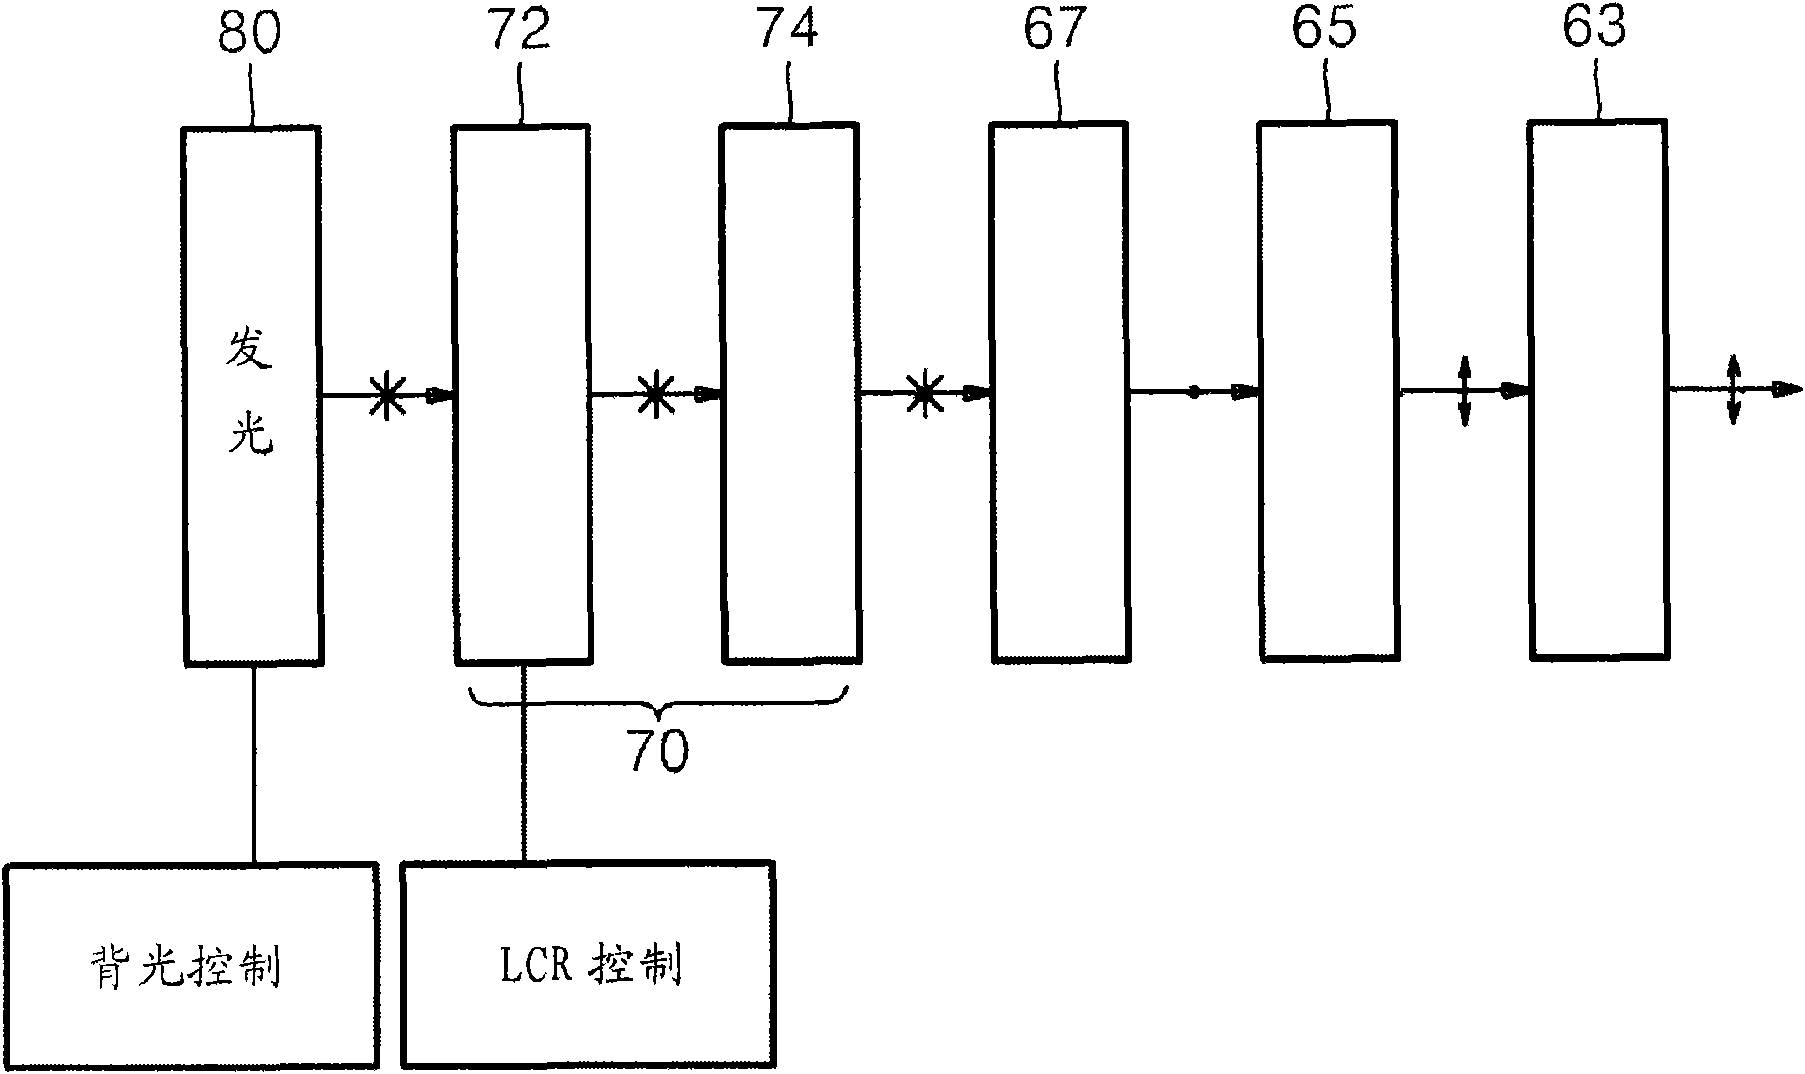 Liquid crystal display device switchable between reflective mode and transmissive mode by employing active reflective polarizer